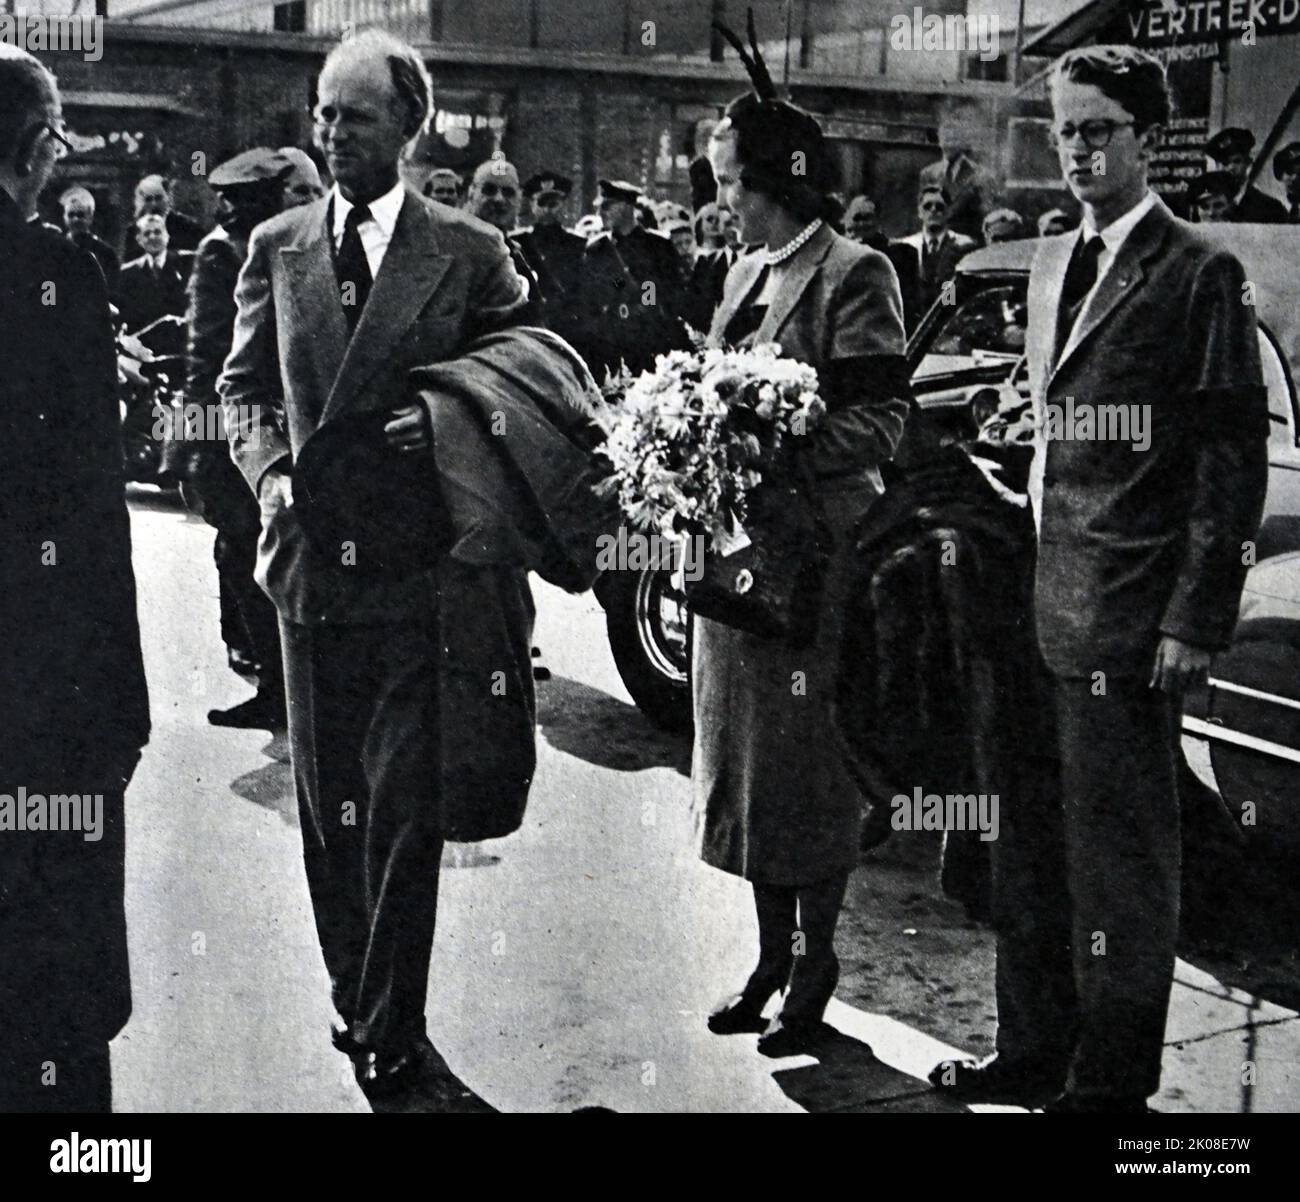 King Leopold of the Belgians, accompanied by Crown Prince Baudouin, with his second wife Princess of Rethy in Amsterdam. Leopold III (3 November 1901 - 25 September 1983) was King of the Belgians from 23 February 1934 until his abdication on 16 July 1951. Princess Lilian of Belgium, Princess of Rethy (born Mary Lilian Henriette Lucie Josephine Ghislaine Baels; 28 November 1916 - 7 June 2002). Baudouin was the elder son of King Leopold III (1901-1983) and his first wife, Princess Astrid of Sweden (1905-1935) Stock Photo